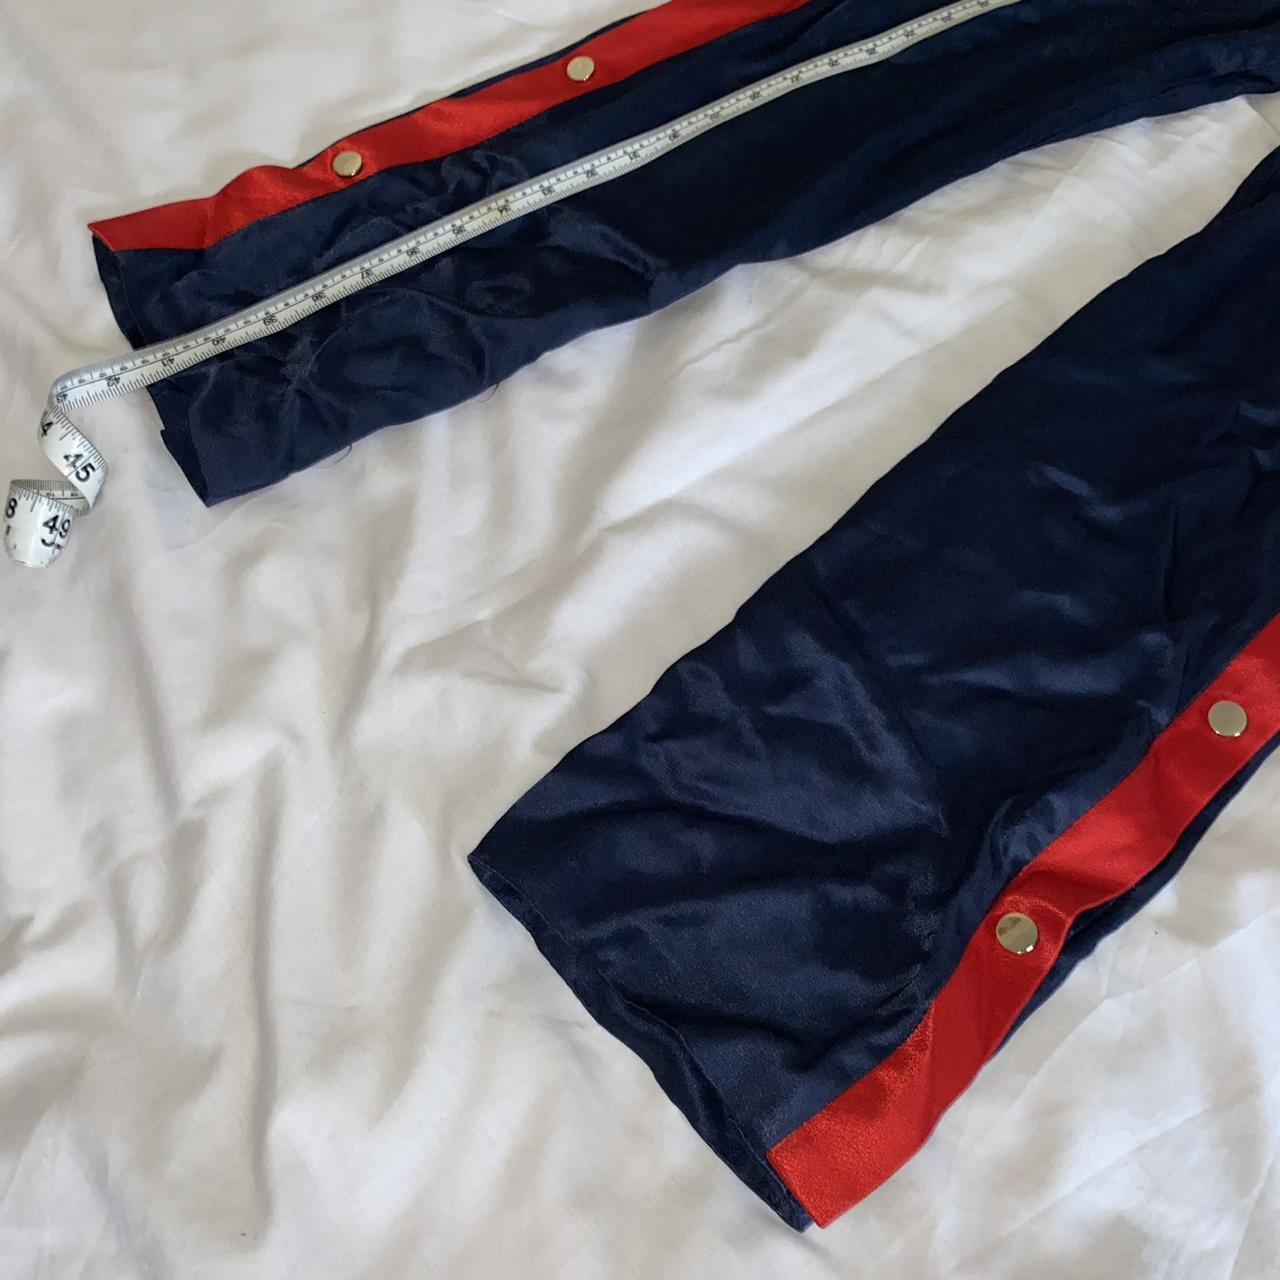 SILK JOGGERS WITH SIDE BUTTONS 30inch leg (measured... - Depop